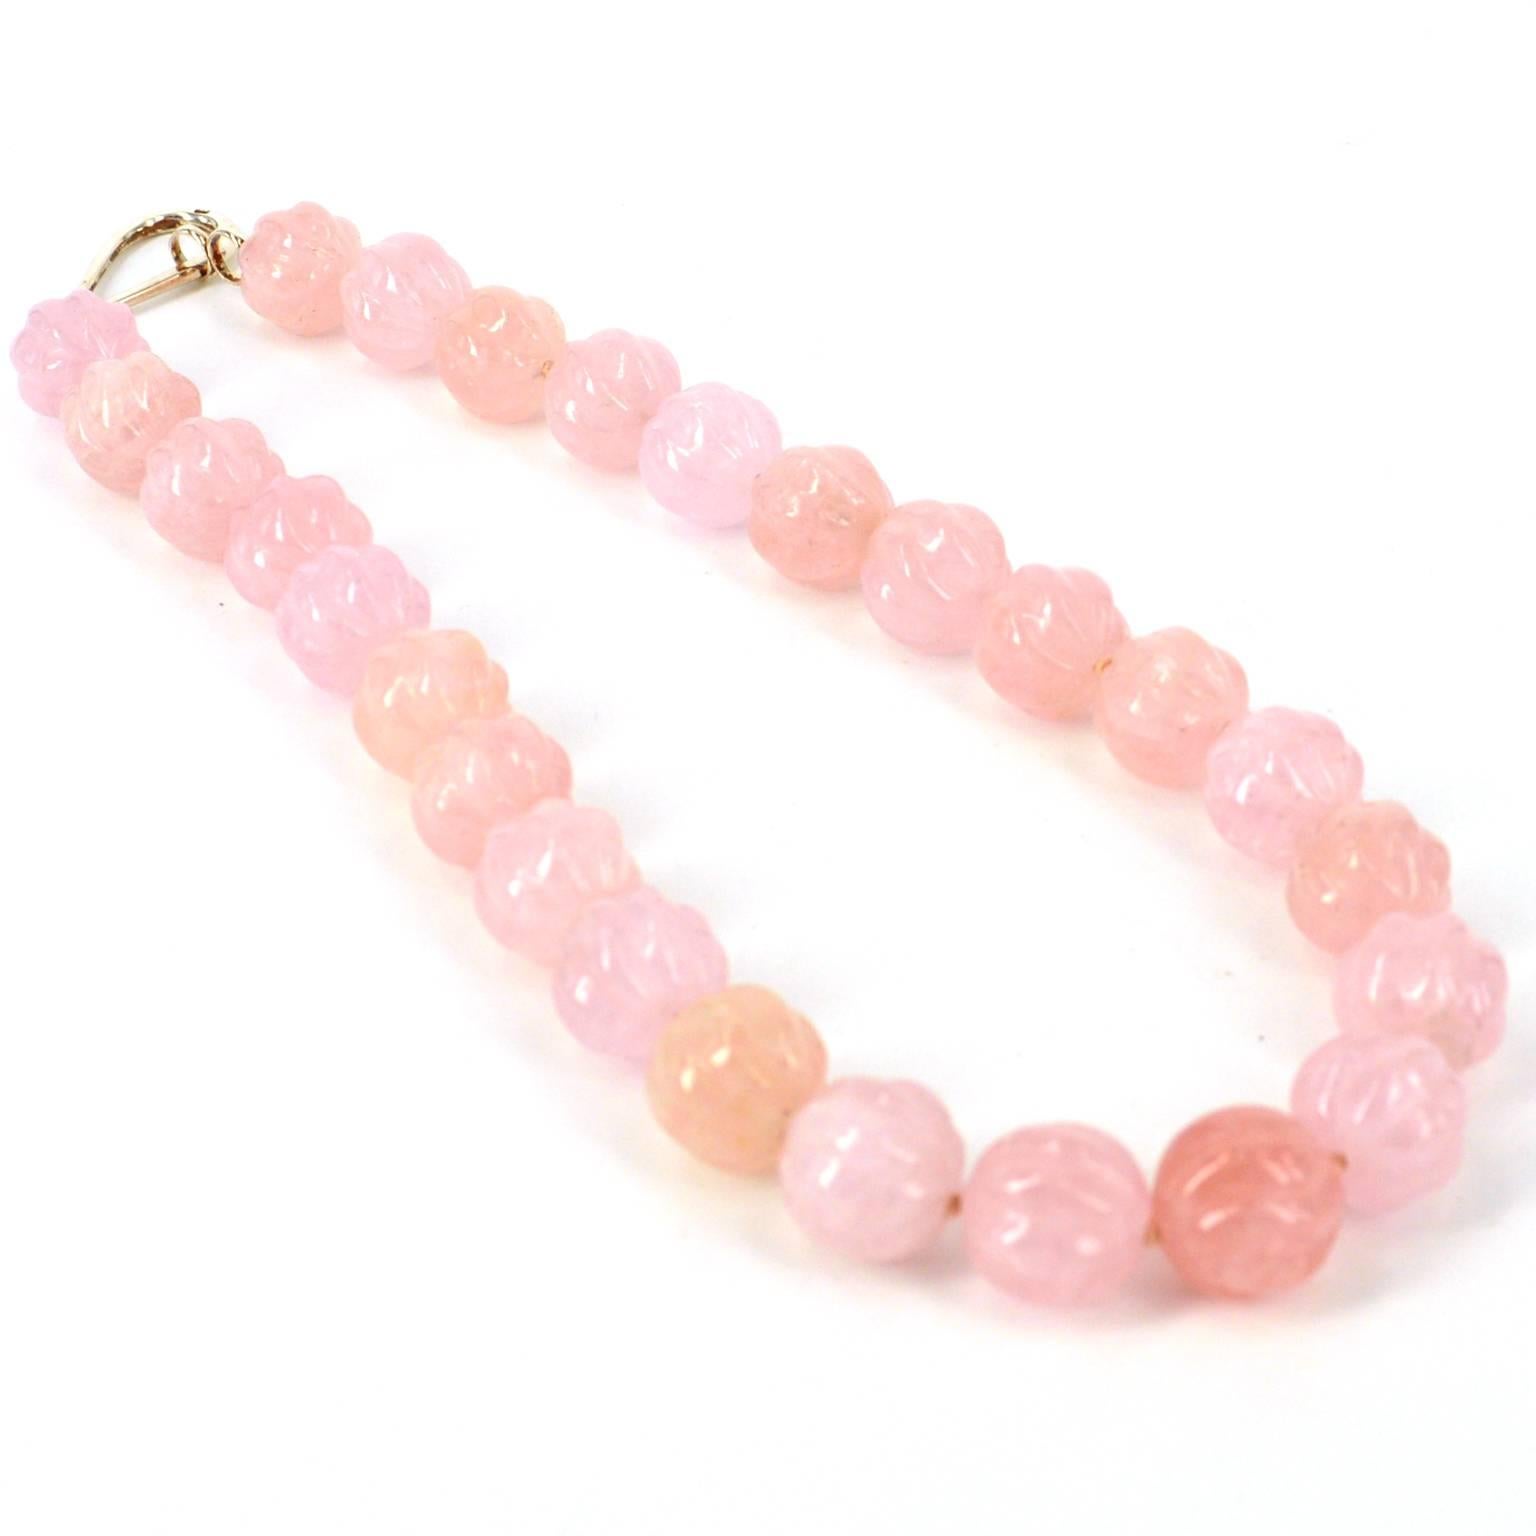 High Quality Carved 15mm Morganite beads hand knotted necklace with a stylish Sterling silver hook clasp. Finished necklace measures 48cm.